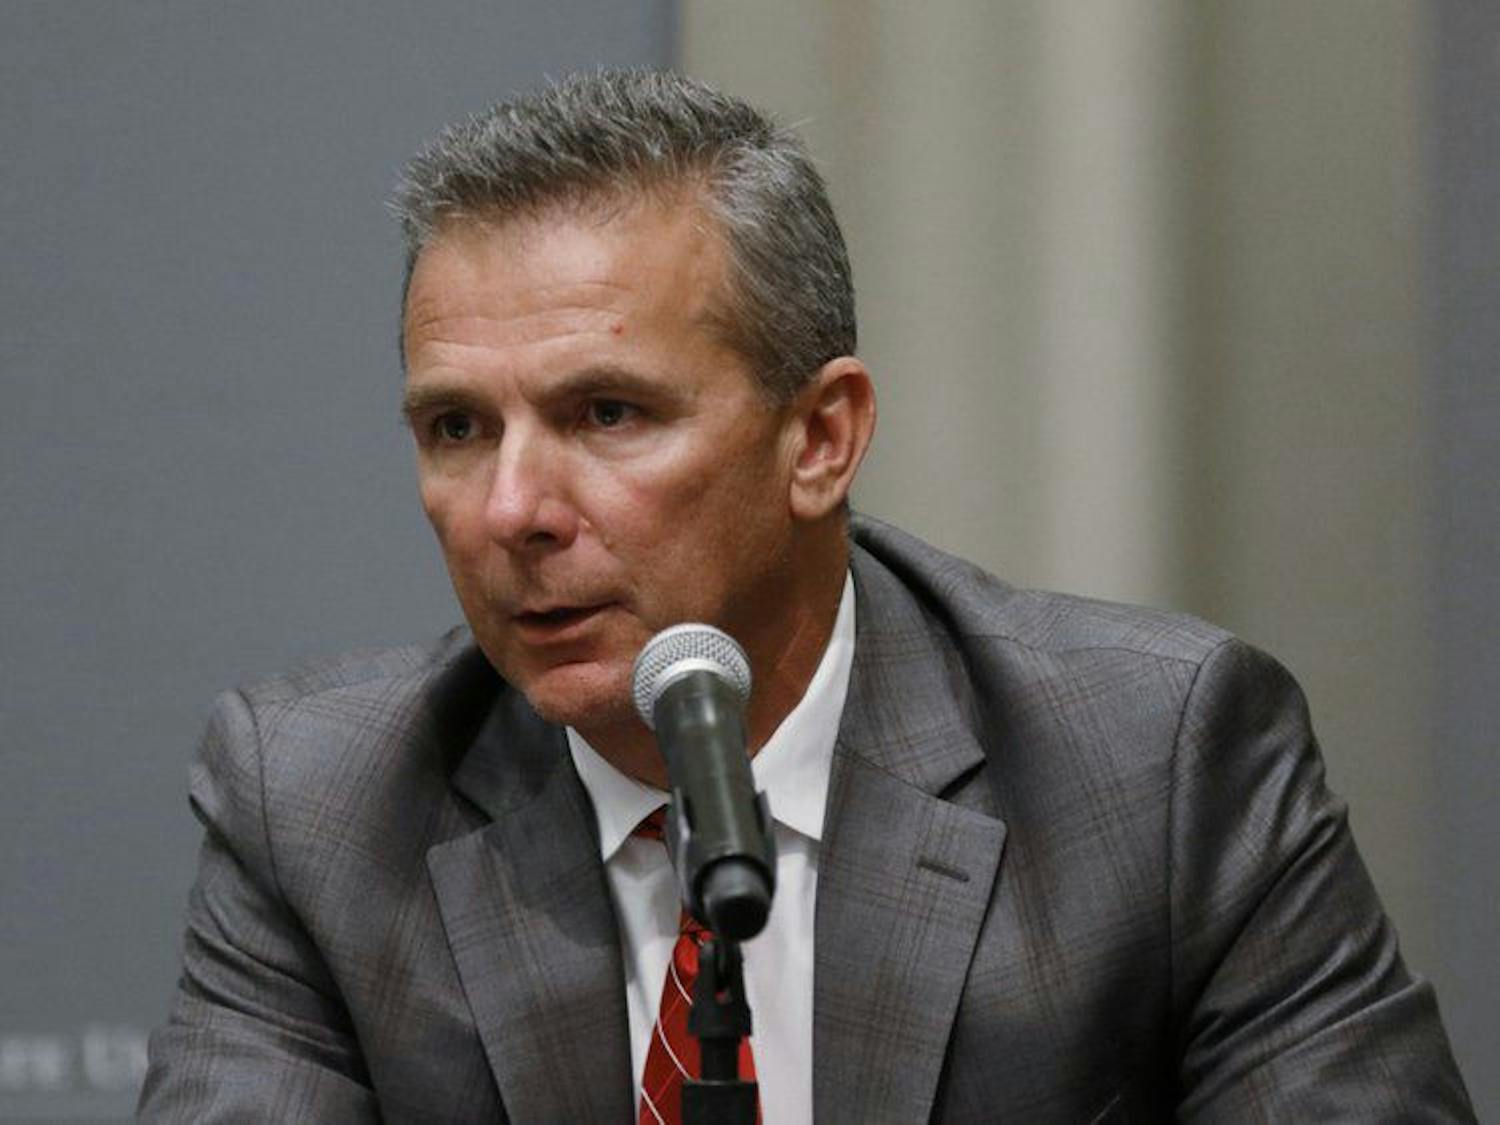 Ohio State coach Urban Meyer was suspended for the team’s first three games for mishandling repeated professional and behavioral problems of assistant coach Zach Smith.